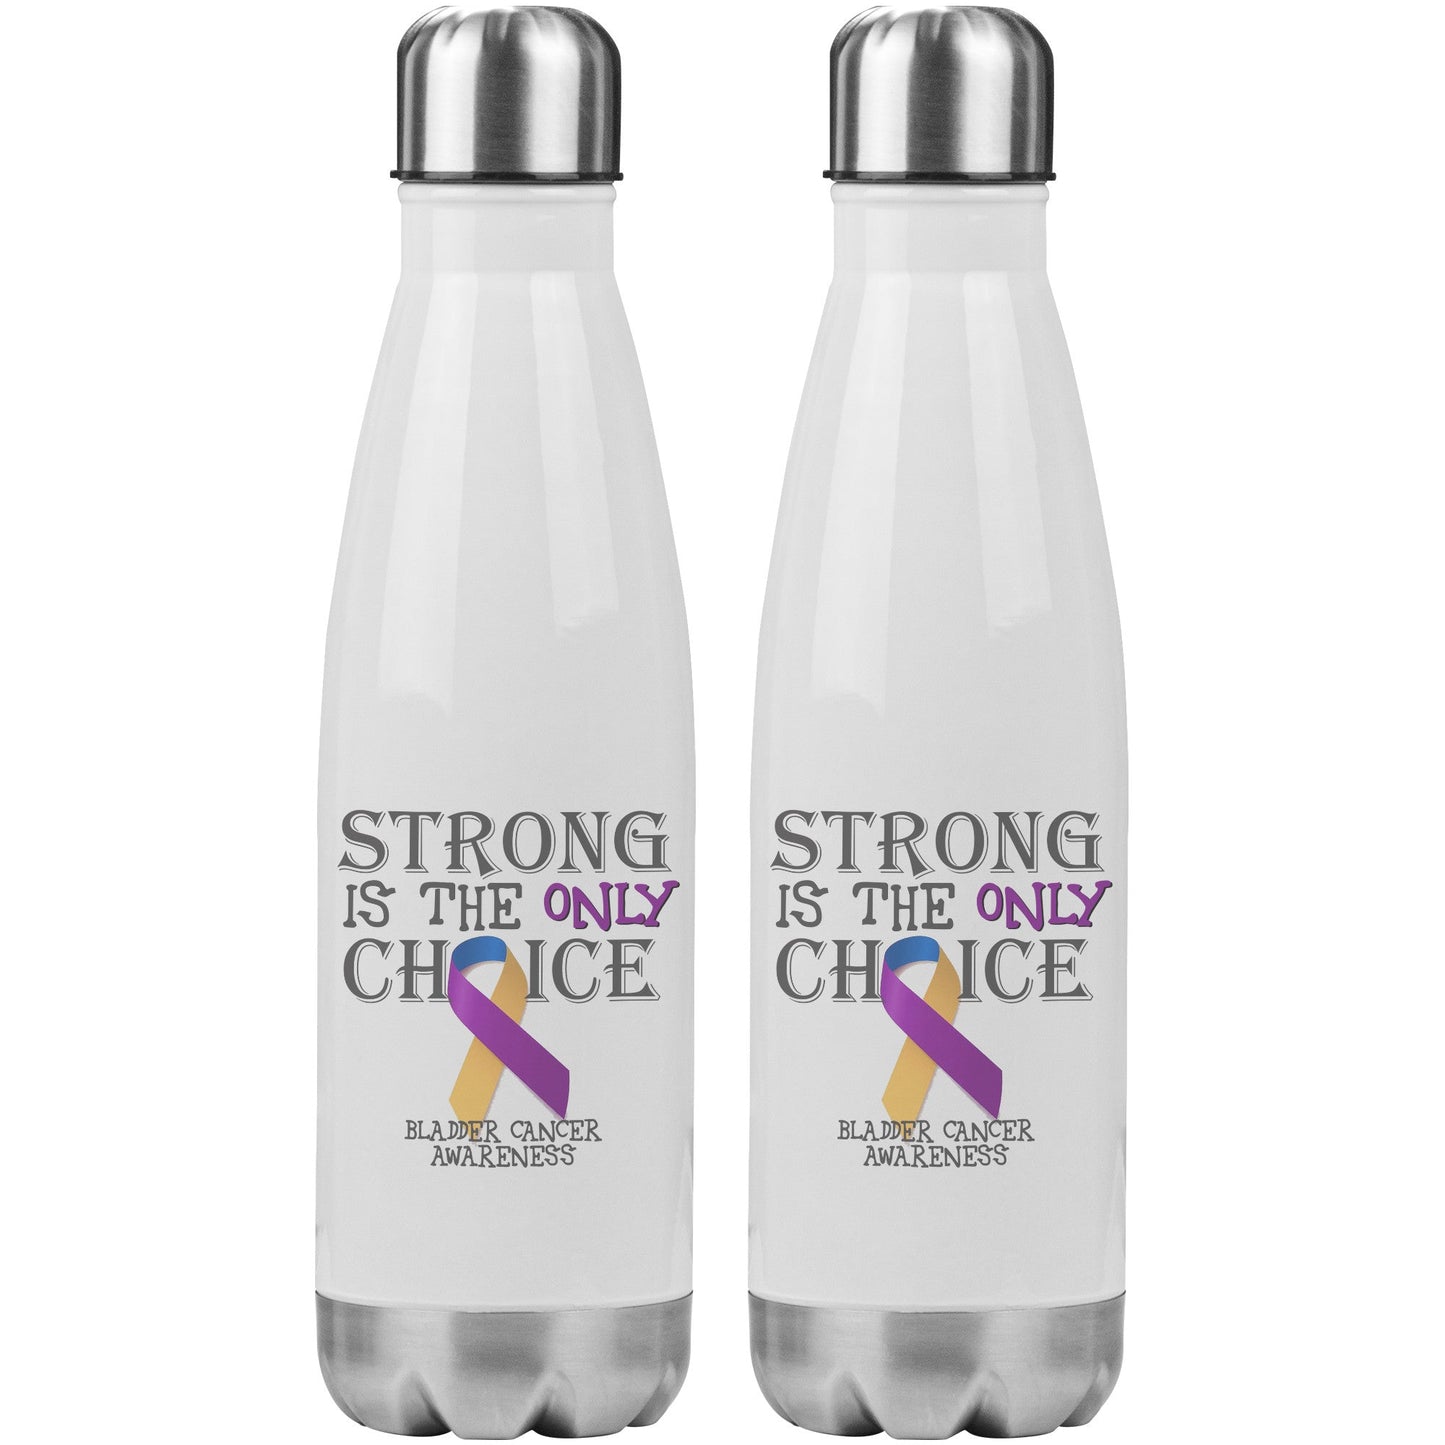 Strong is the Only Choice -Bladder Cancer Awareness 20oz Insulated Water Bottle |x|